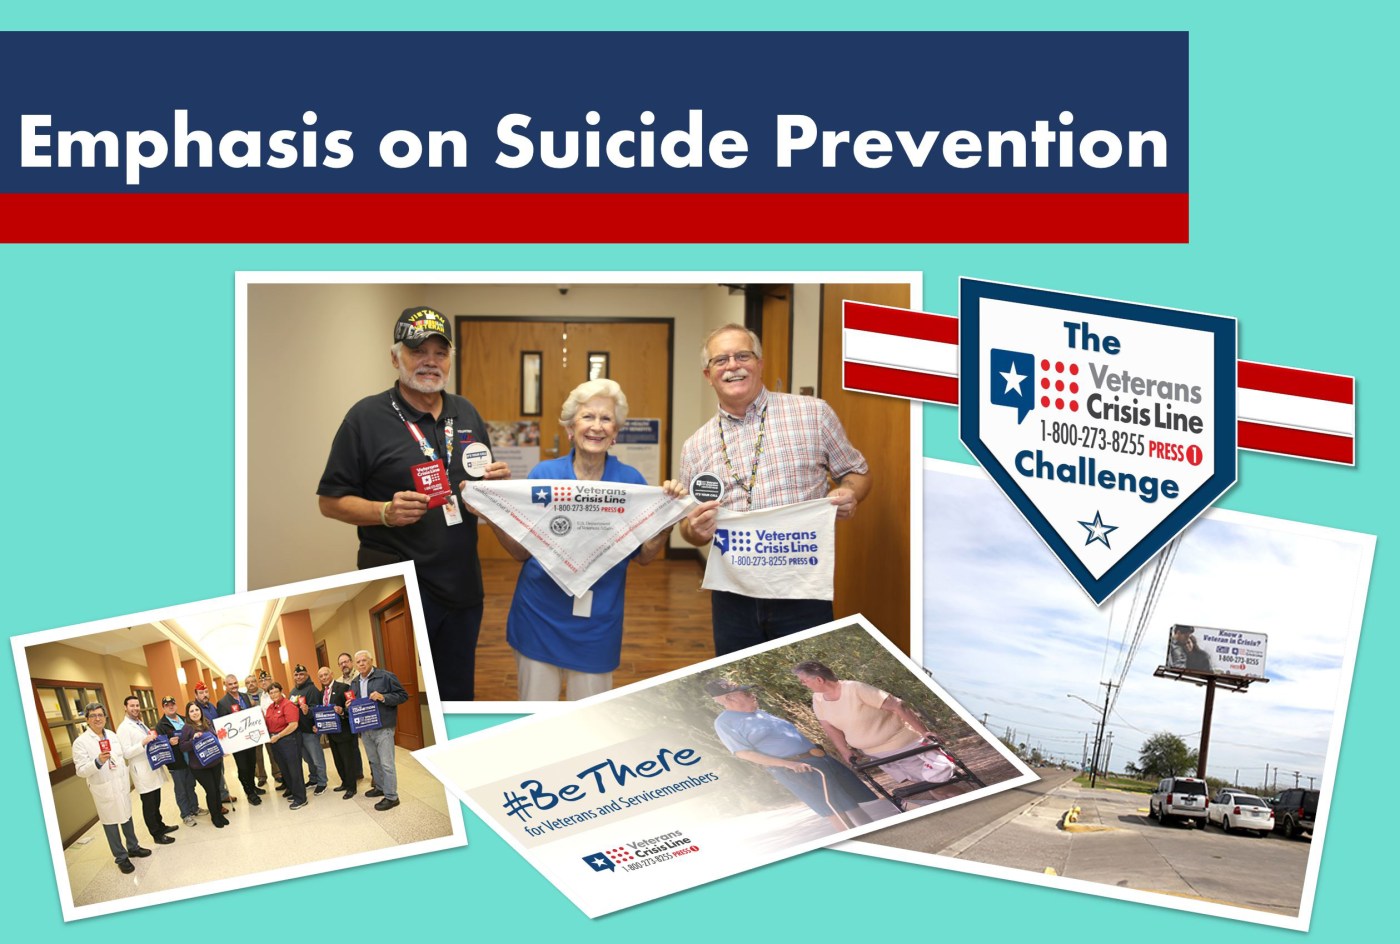 VA Texas Valley Coastal Bend Health Care System (VCB) outreach efforts focus on suicide prevention. (U.S. Department of Veterans Affairs photo illustration by Luis H. Loza Gutierrez)